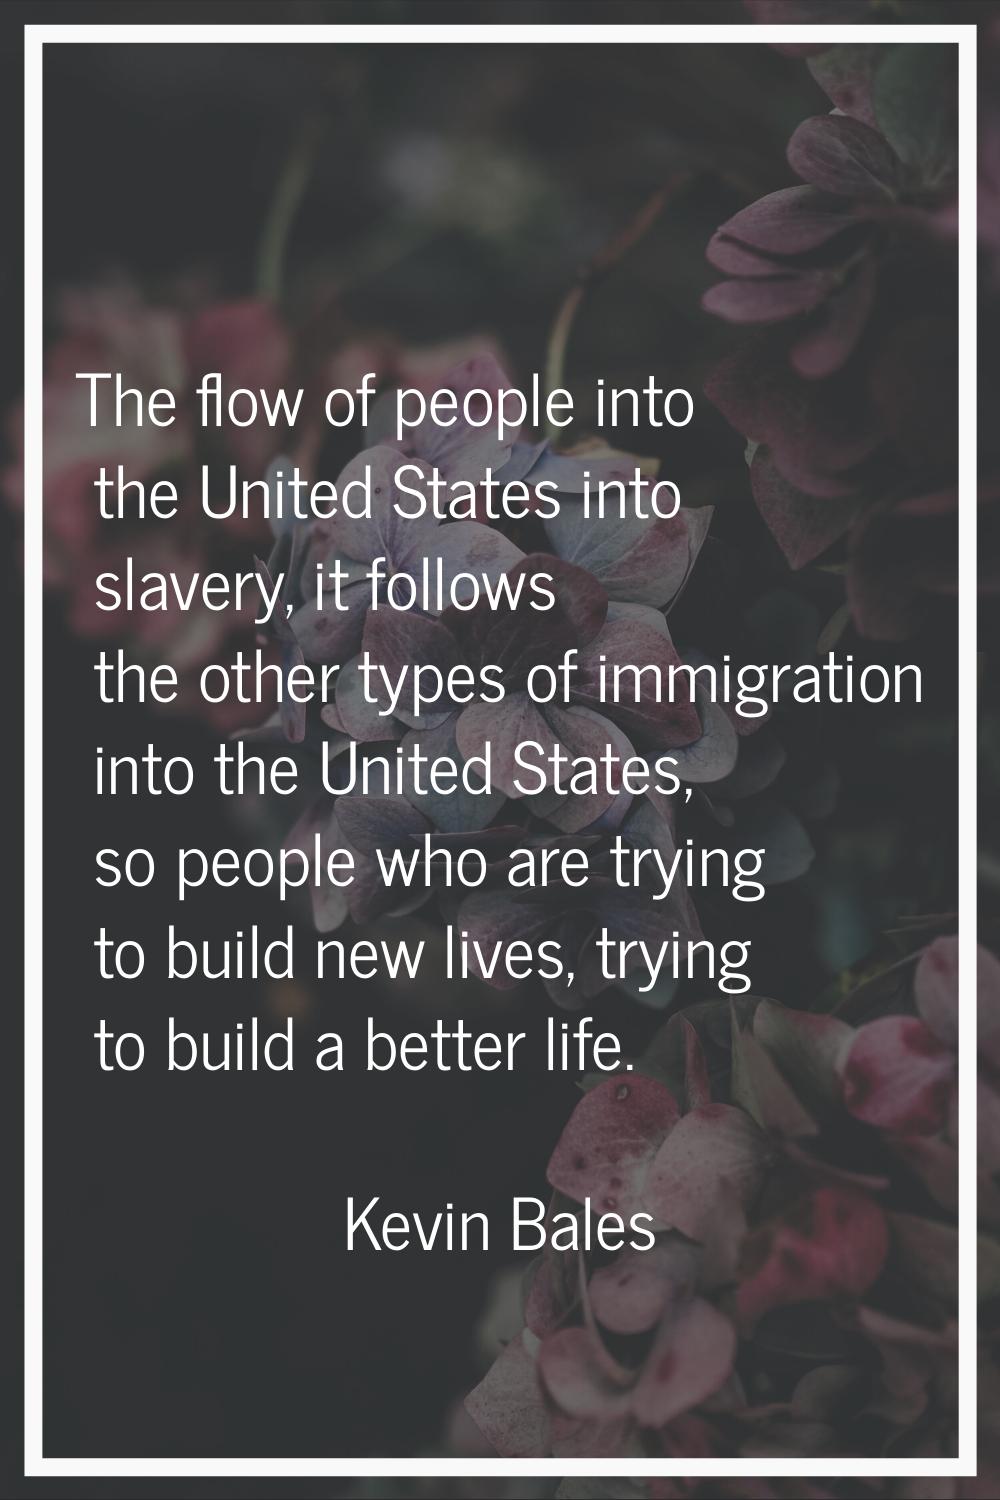 The flow of people into the United States into slavery, it follows the other types of immigration i